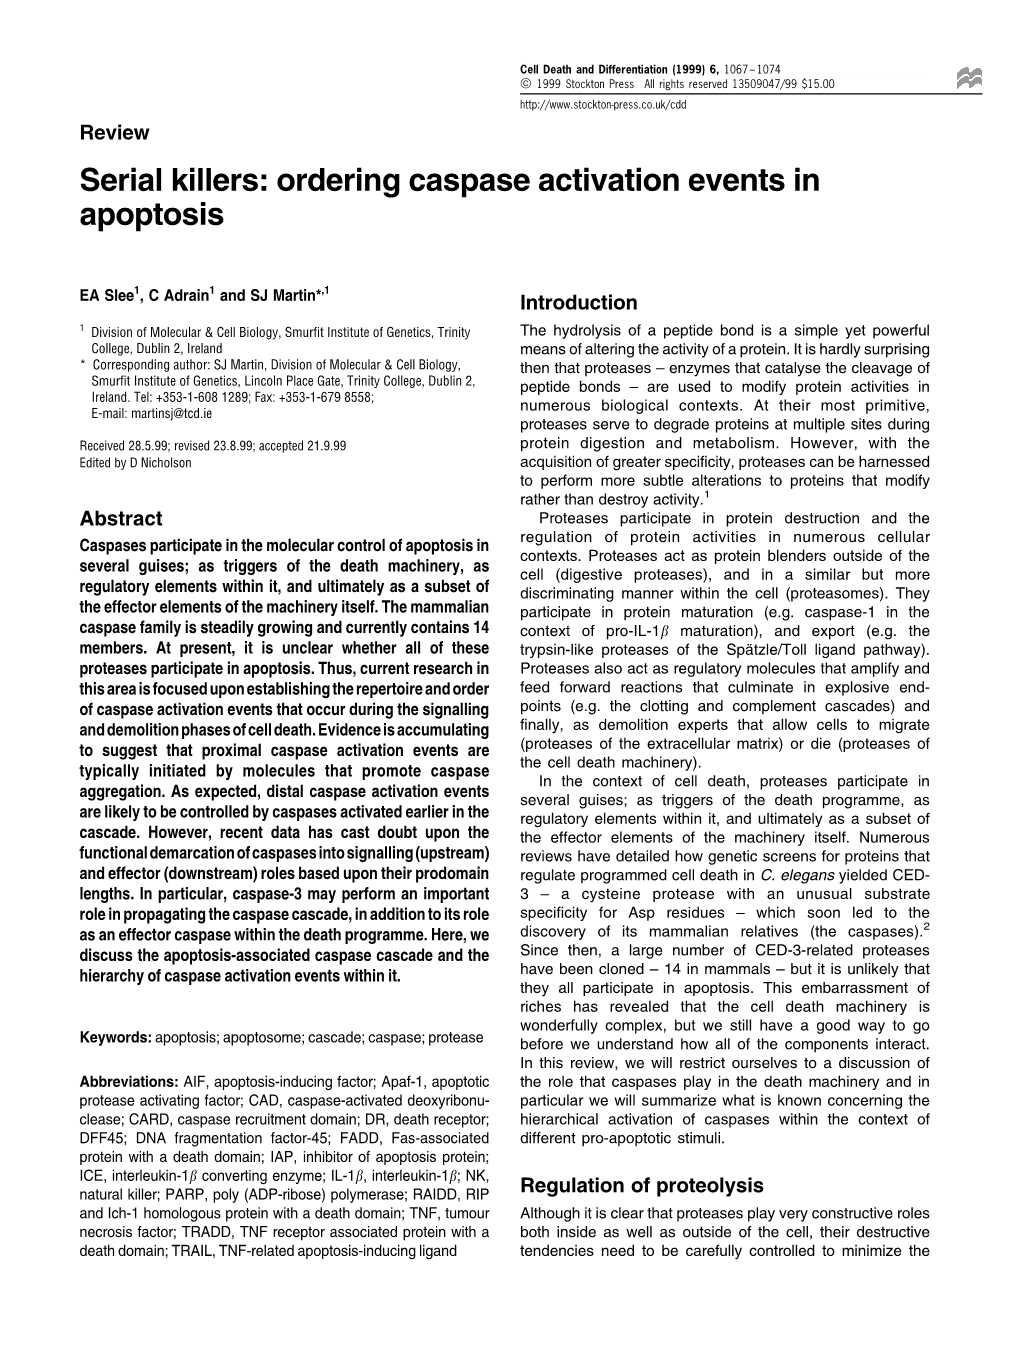 Serial Killers: Ordering Caspase Activation Events in Apoptosis